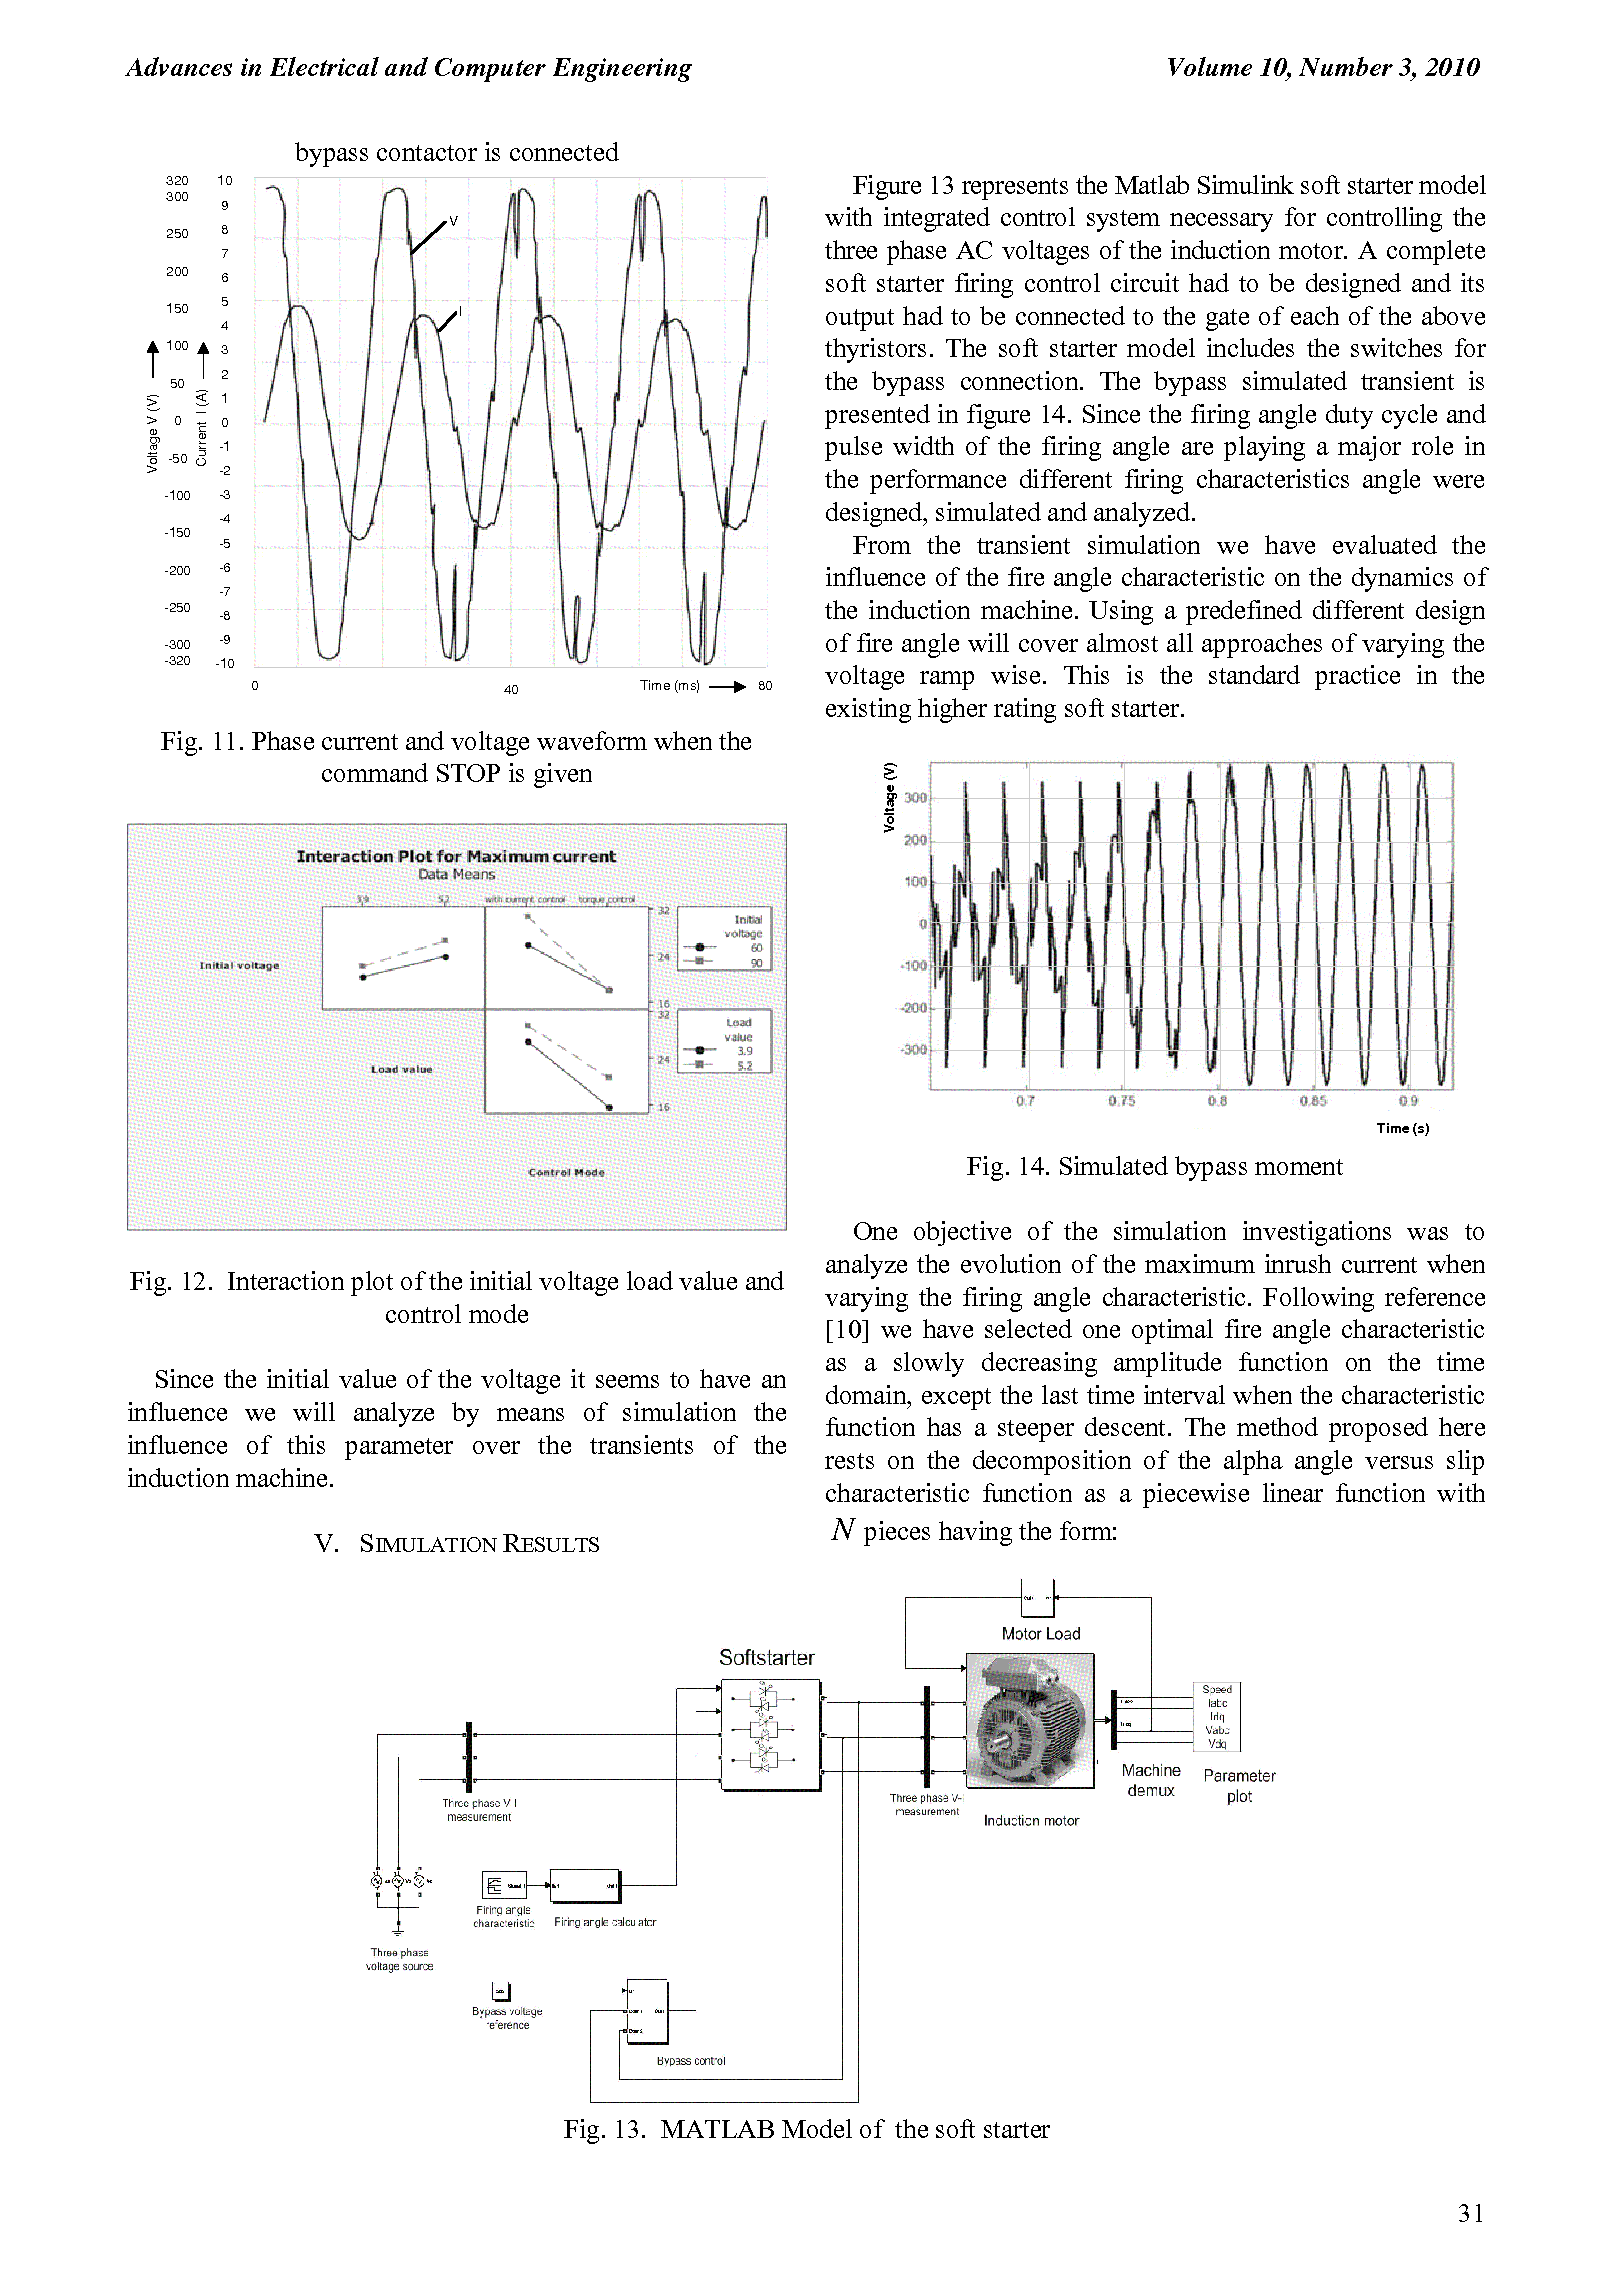 PDF Quickview for paper with DOI:10.4316/AECE.2010.03005